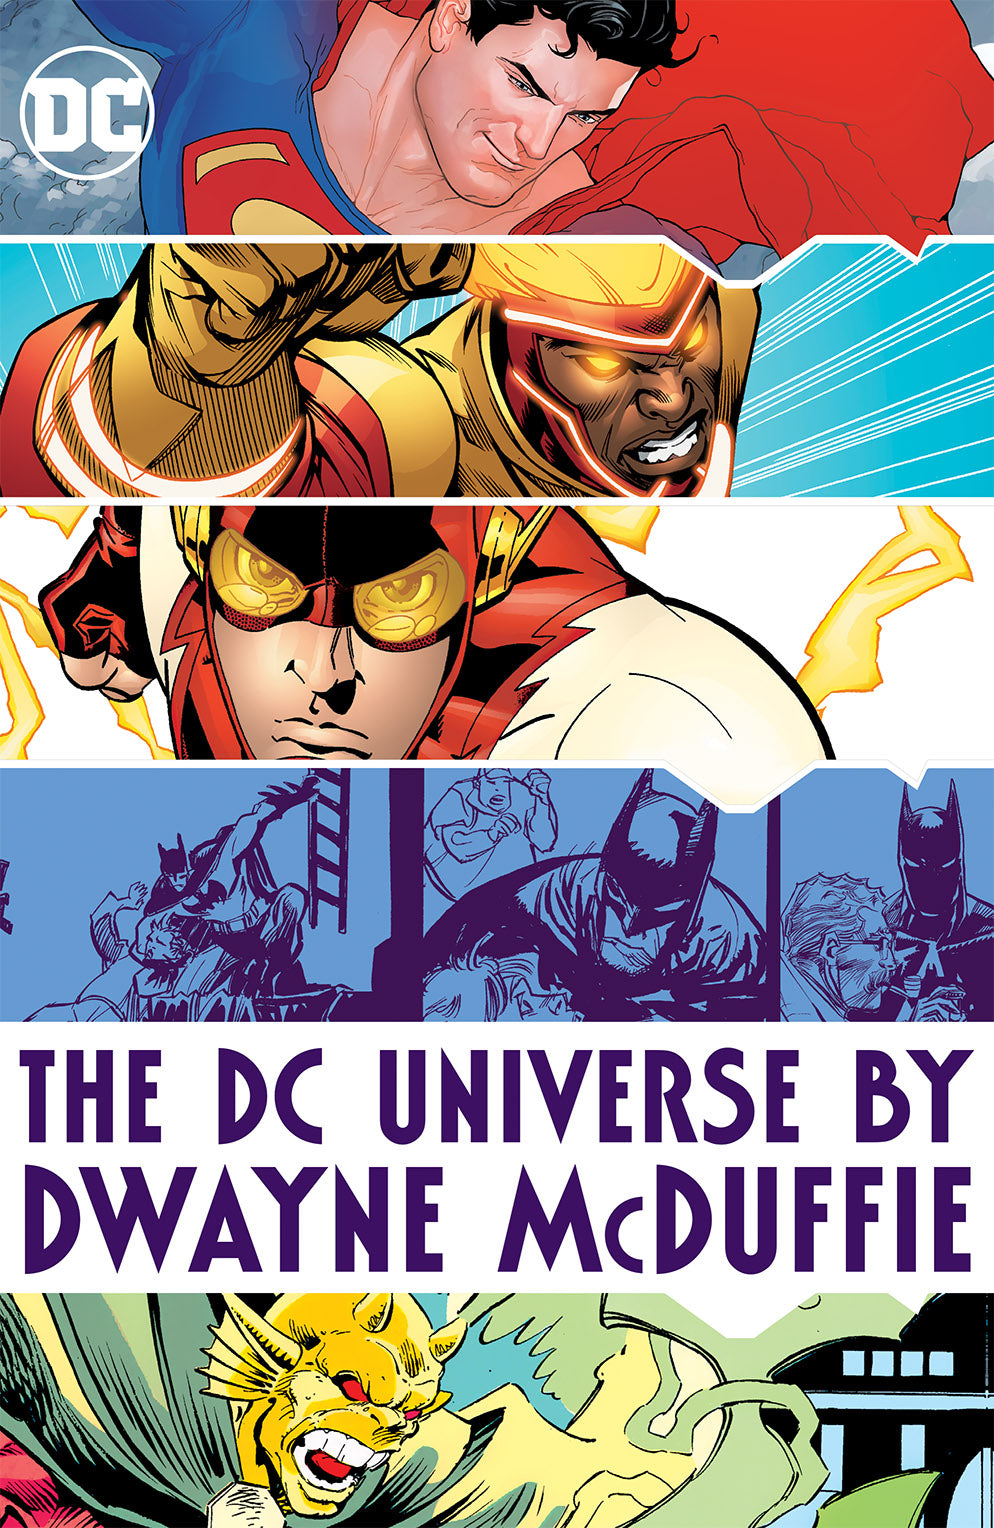 DC UNIVERSE BY DWAYNE MCDUFFIE HARDCOVER